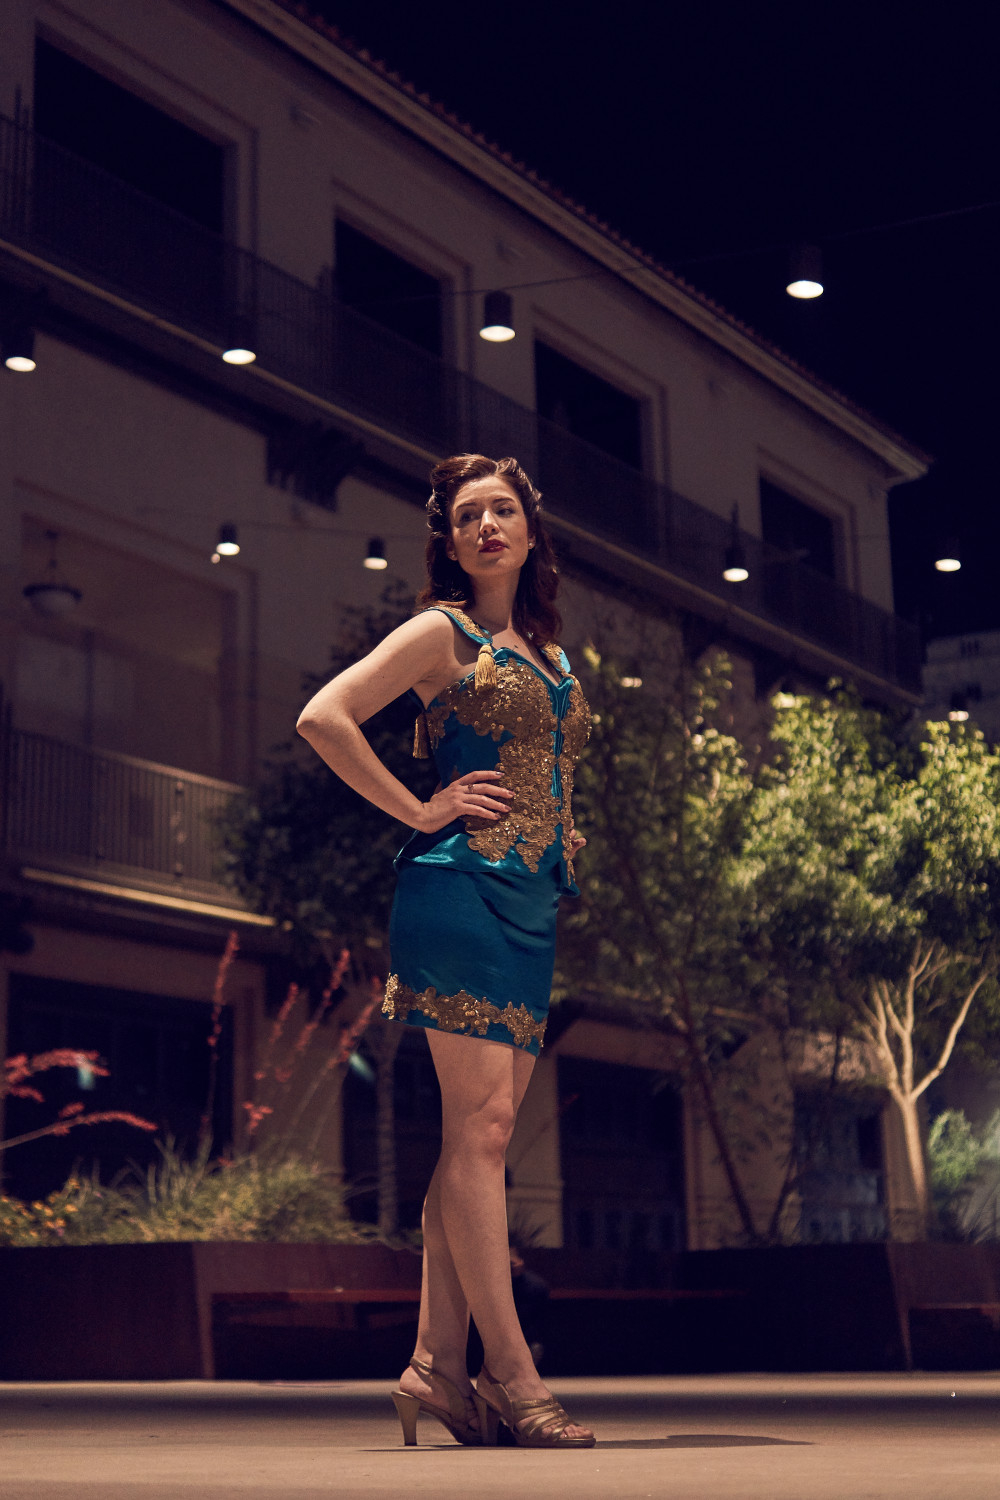 Another shot of the teal dress to showcase more fabric and embroidery detail